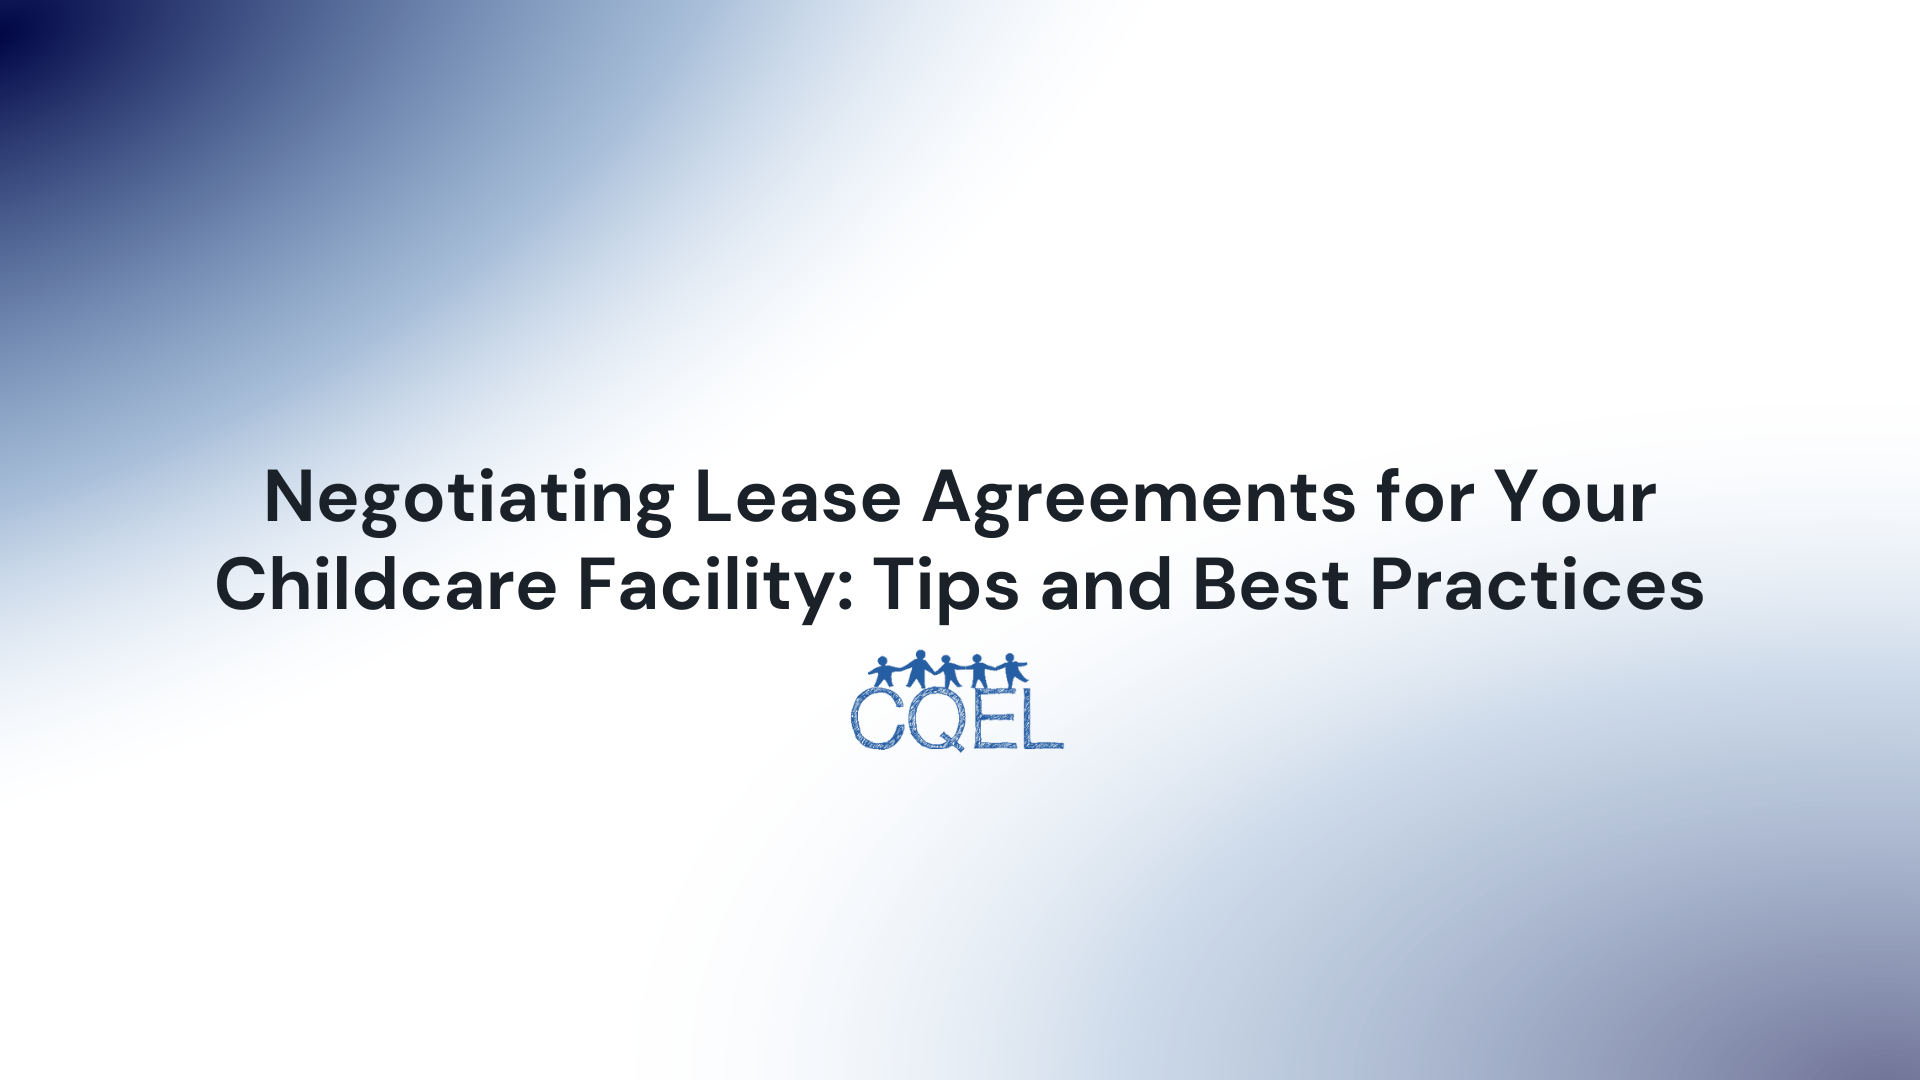 Negotiating Lease Agreements for Your Childcare Facility: Tips and Best Practices